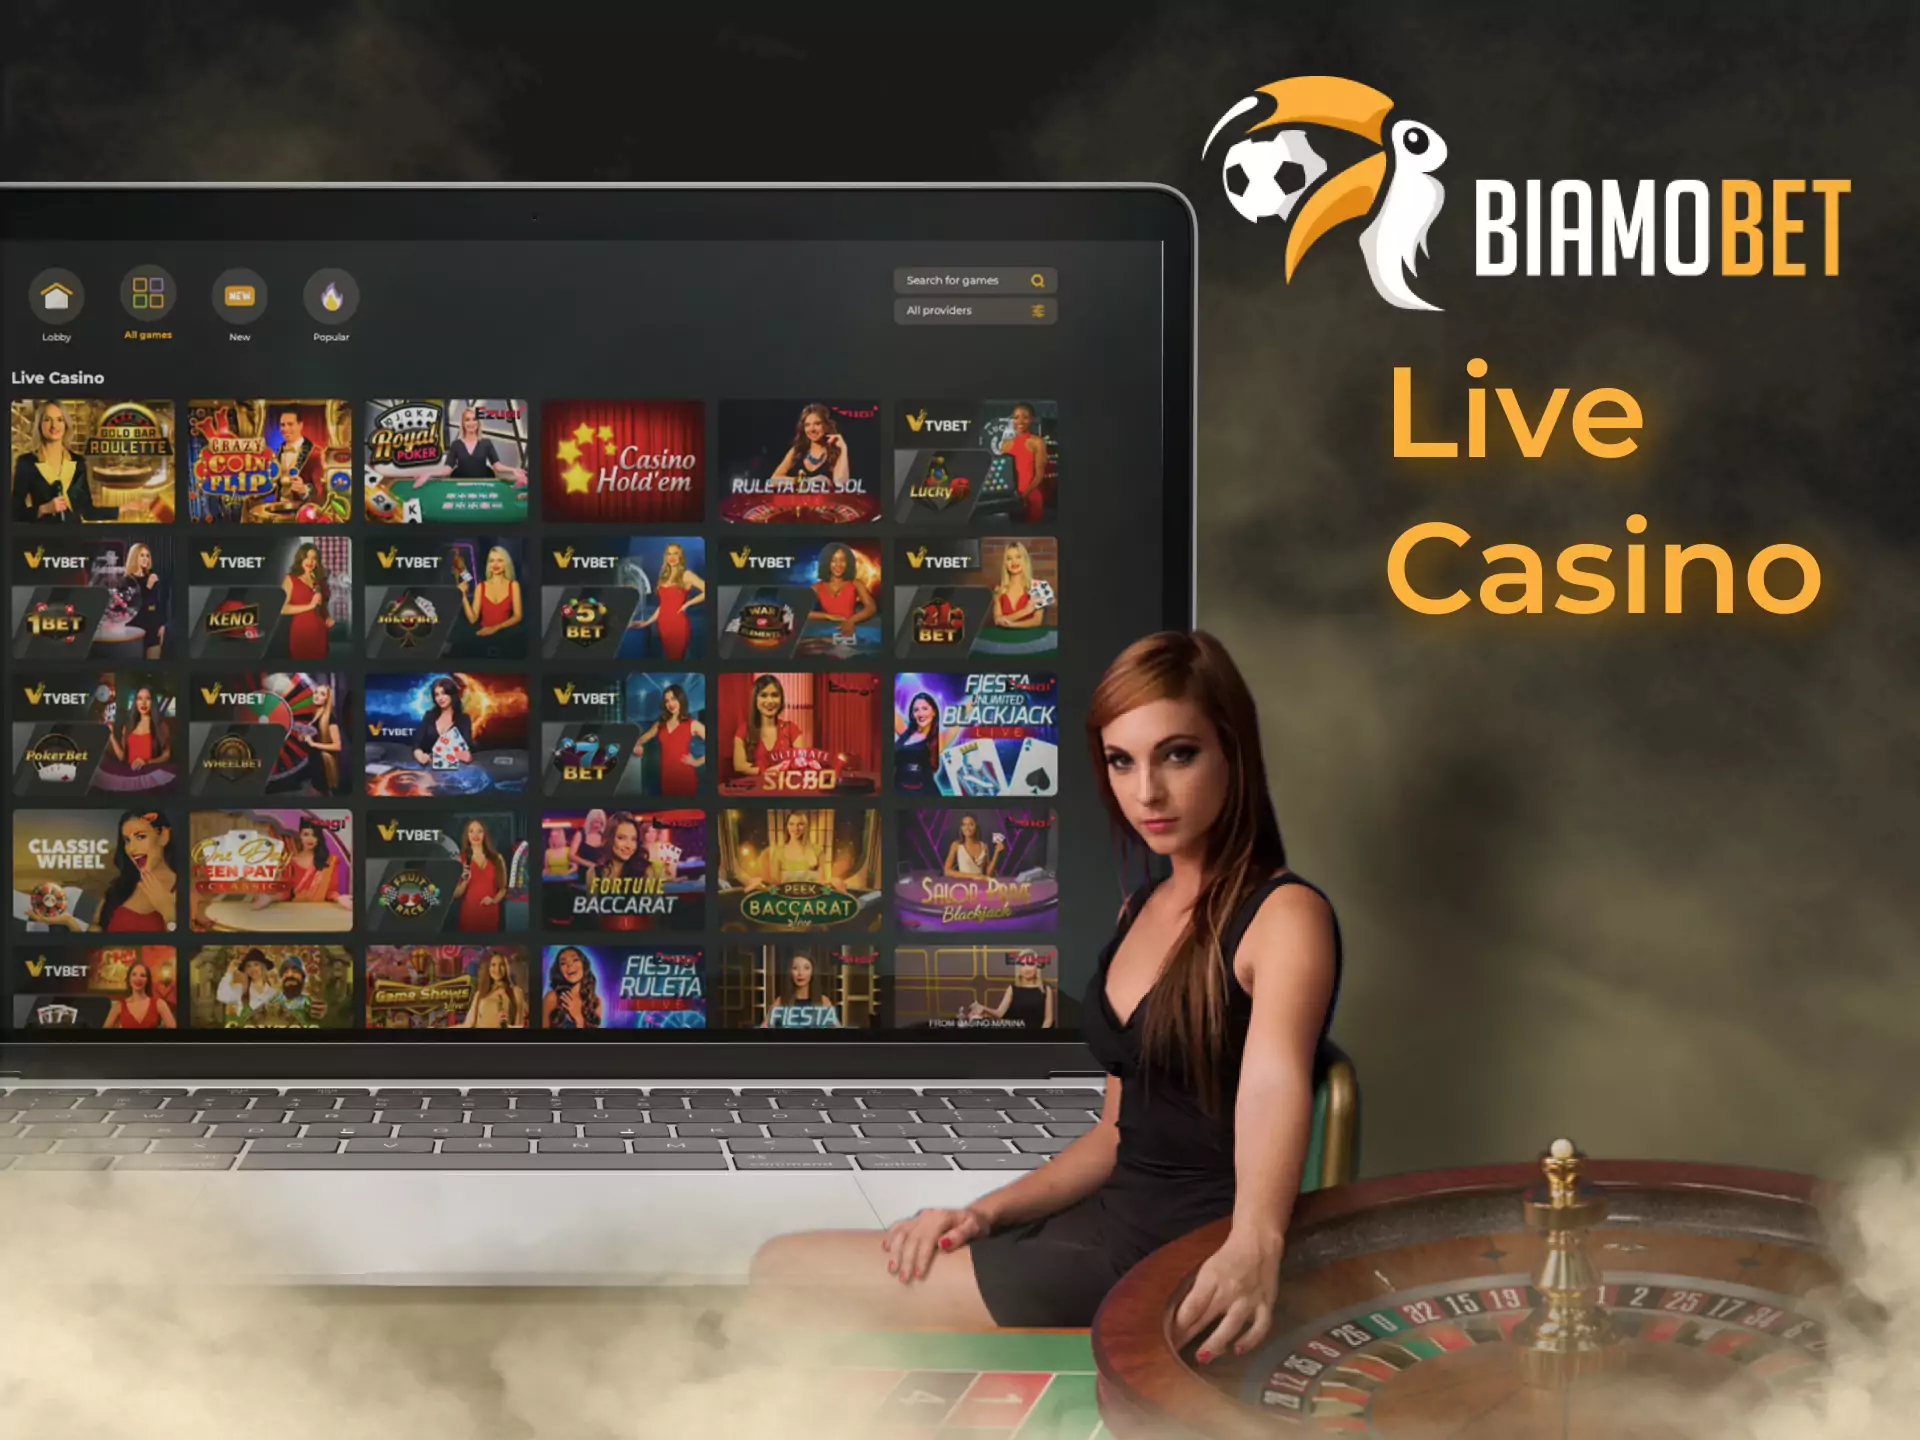 You can play card games with a live dealer and other players in the Biamobet Live Casino.